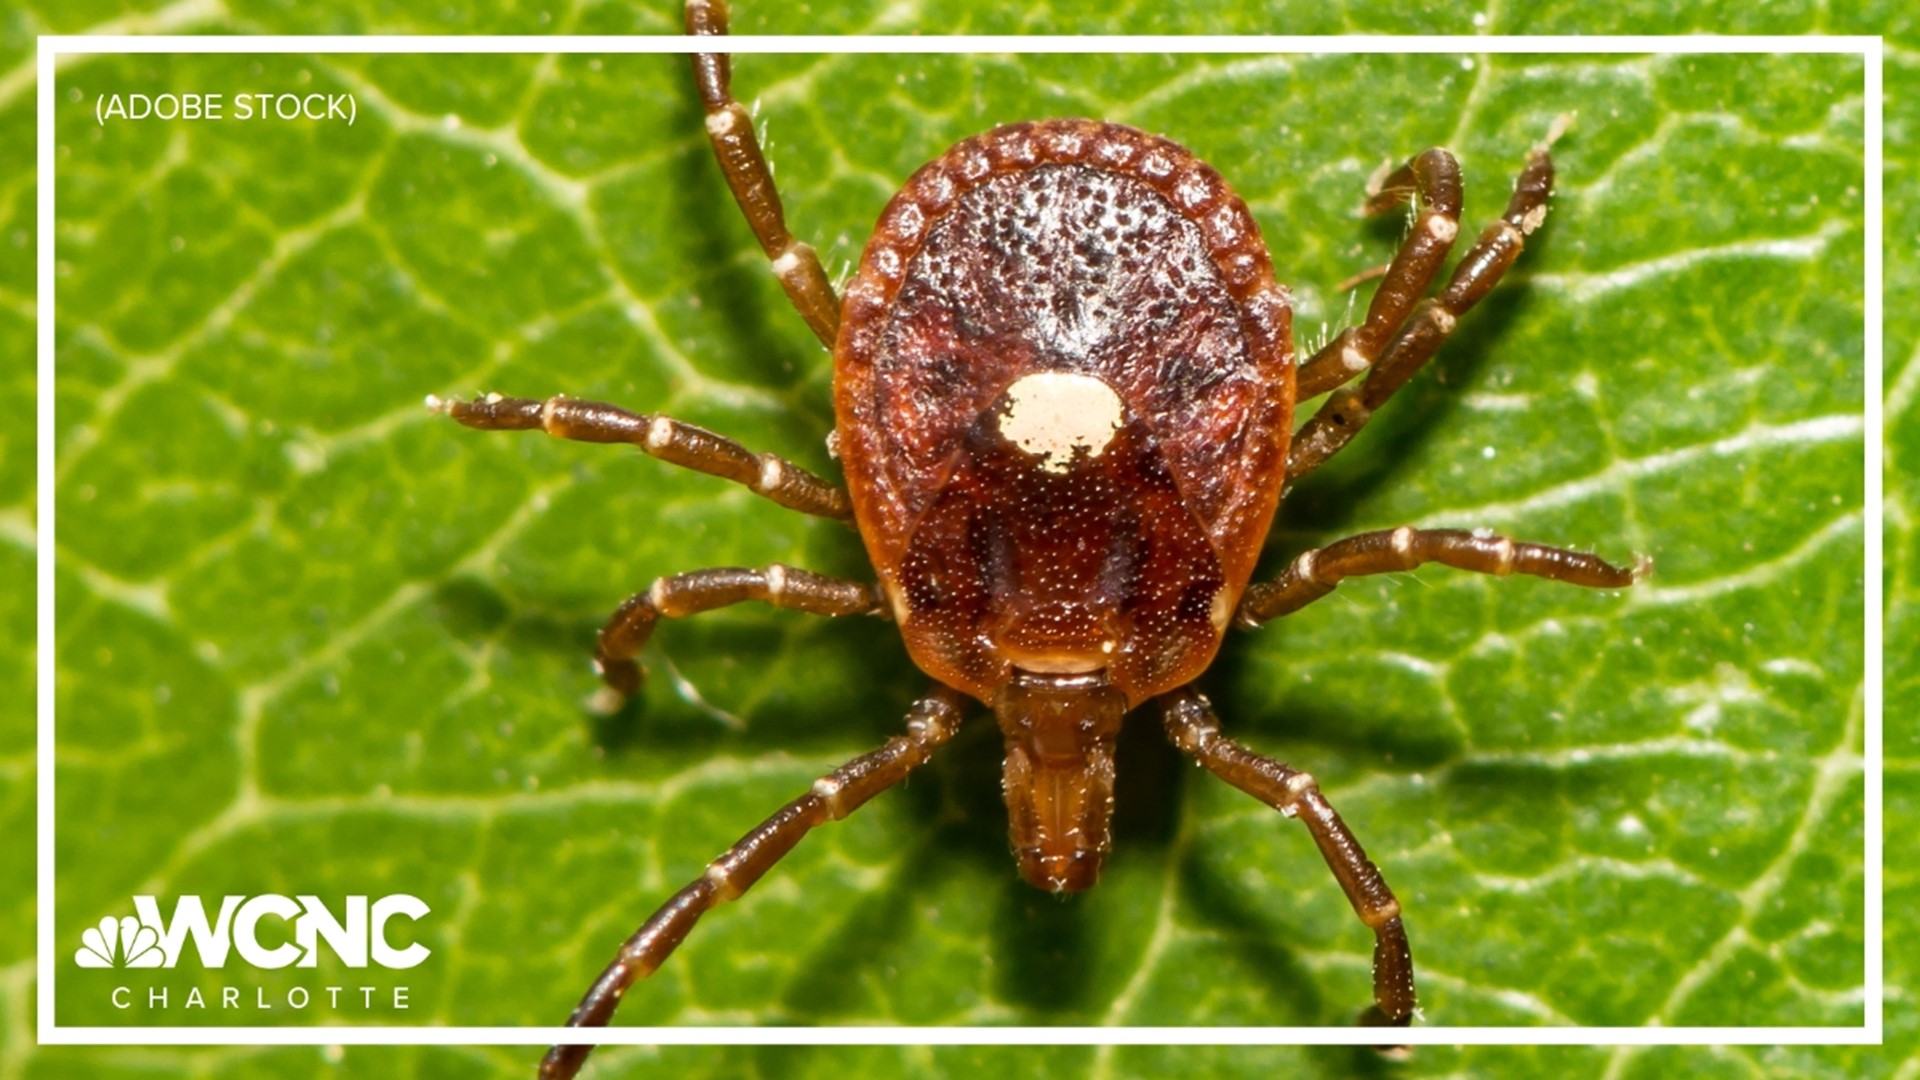 Vanessa Ruffes shares how a Lone Star tick bite can trigger red meat allergies